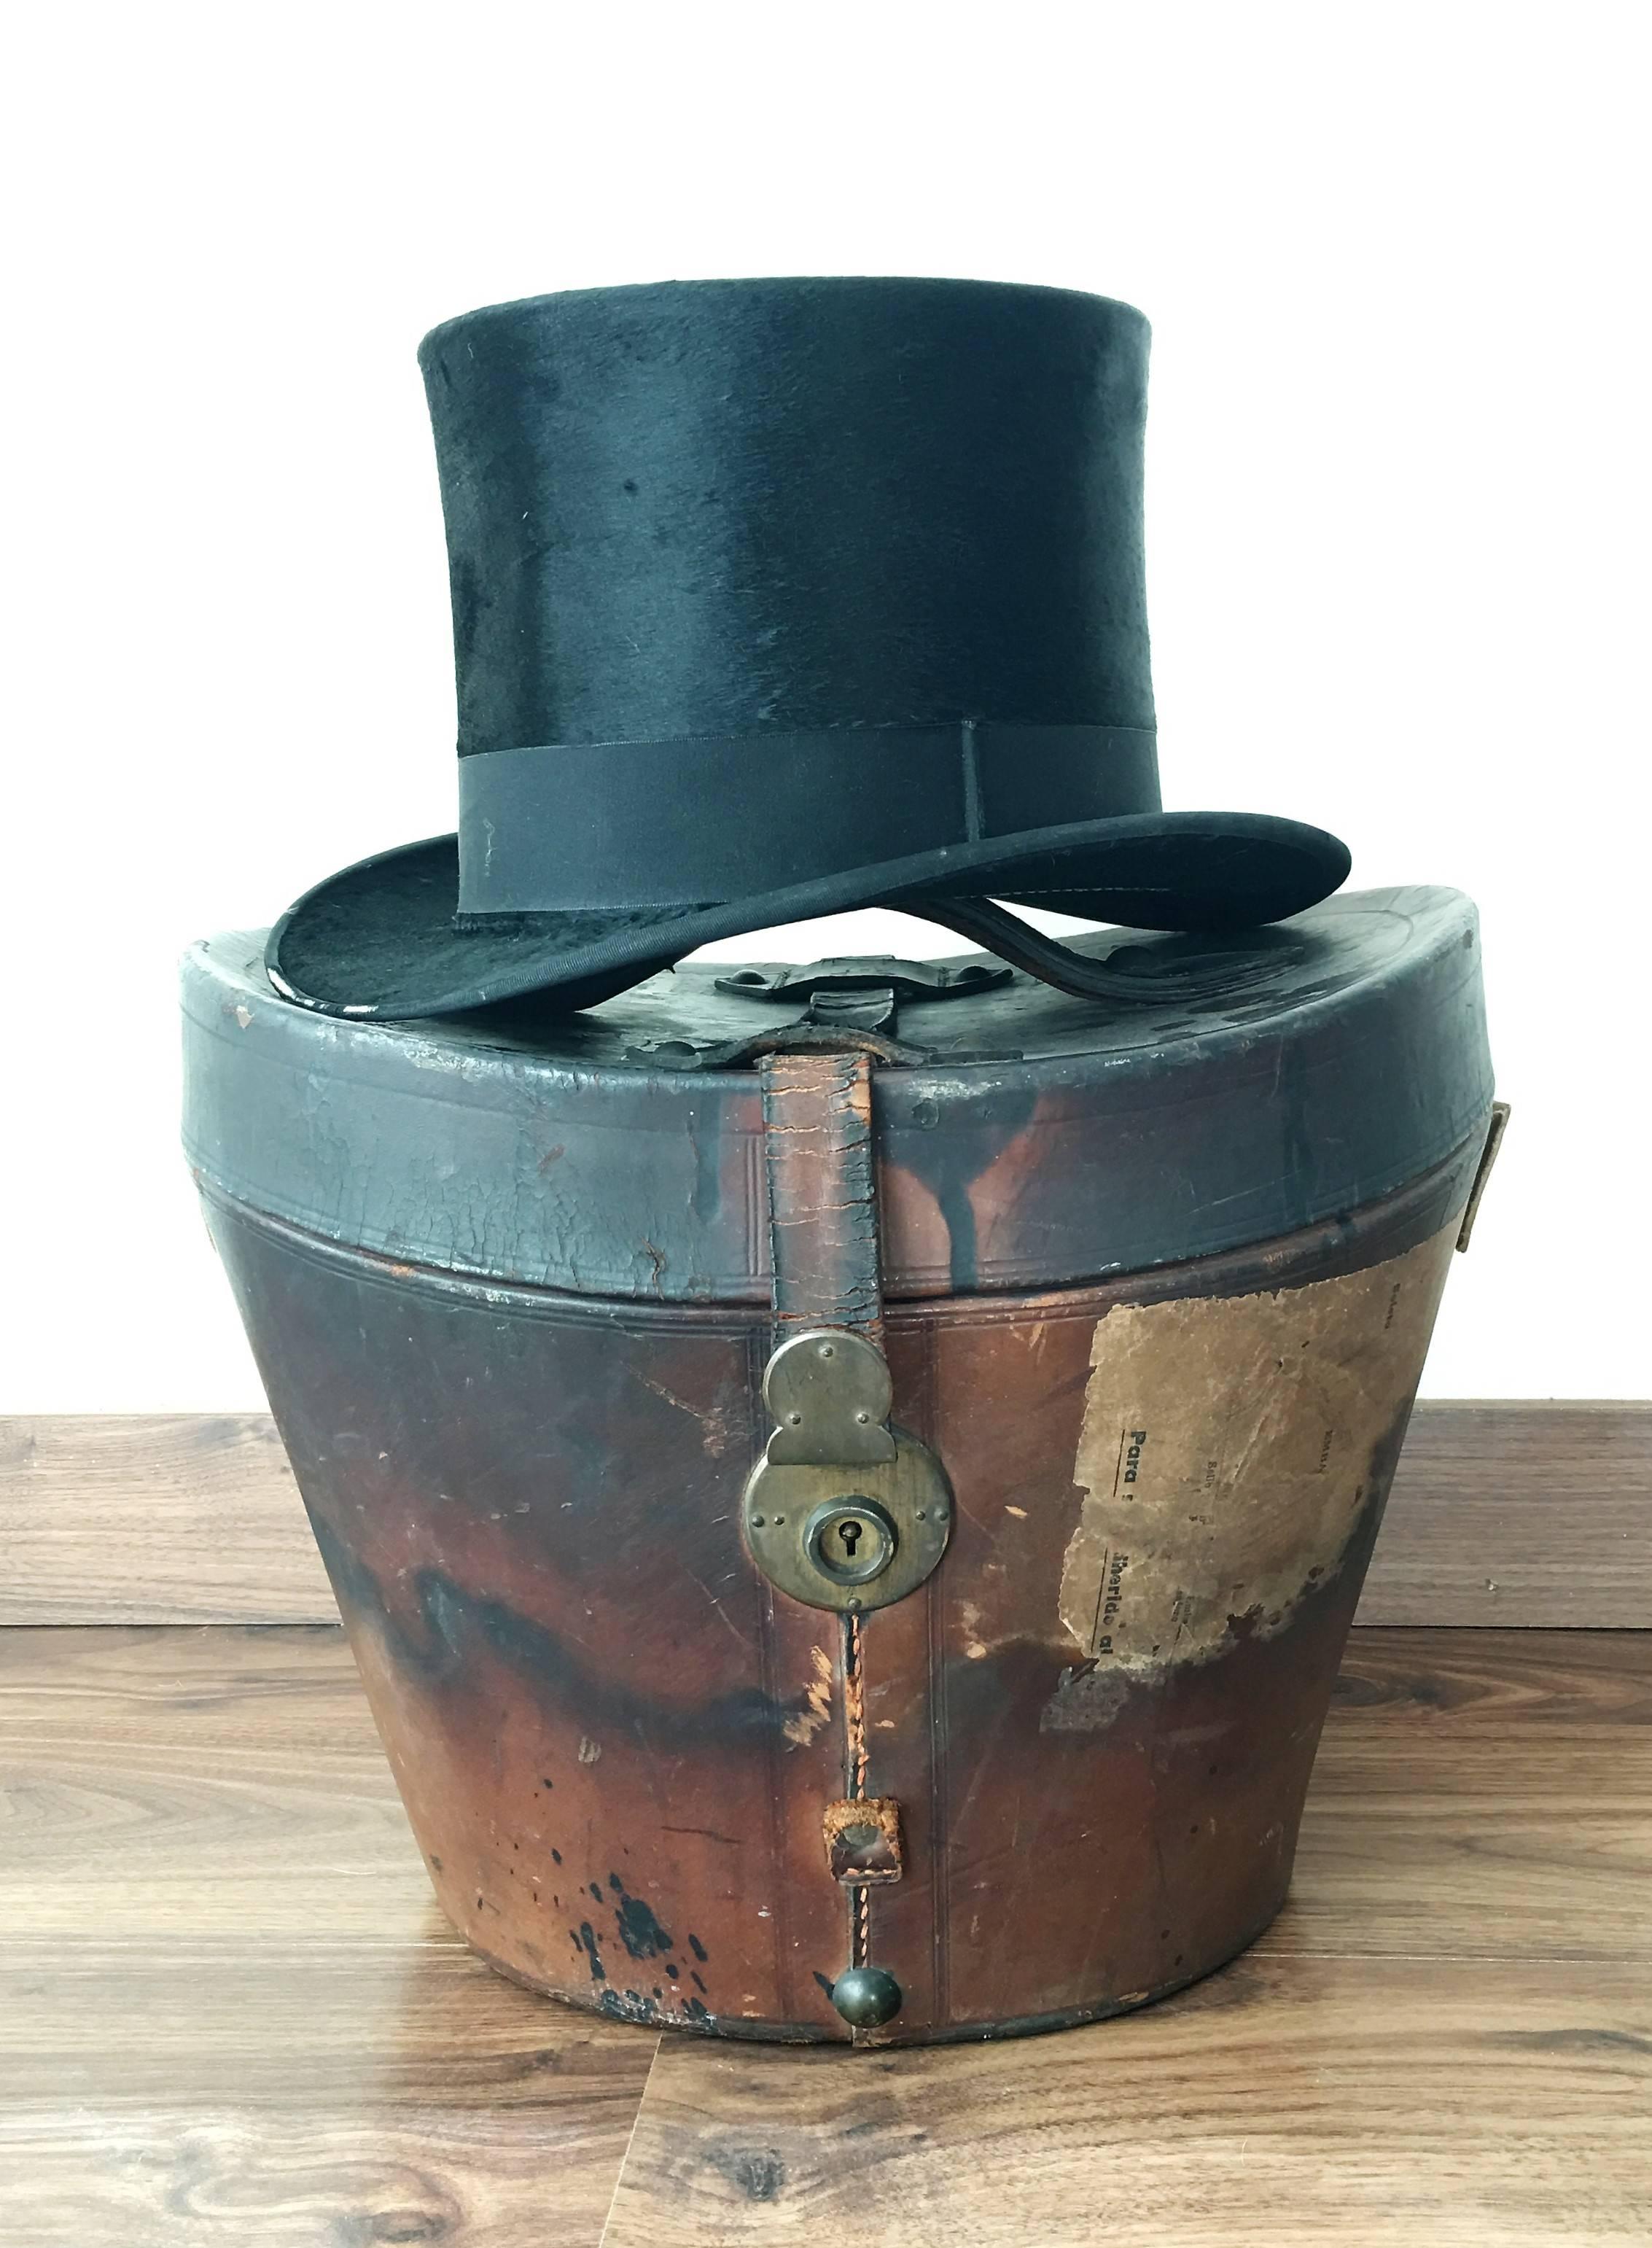 A very fine silk top hat made for Borchert, Berlin. The ‘topper’ is in excellent wearable condition with an external black band and bow. The interior white satin lining is in excellent clean condition with a royal crest and printed .